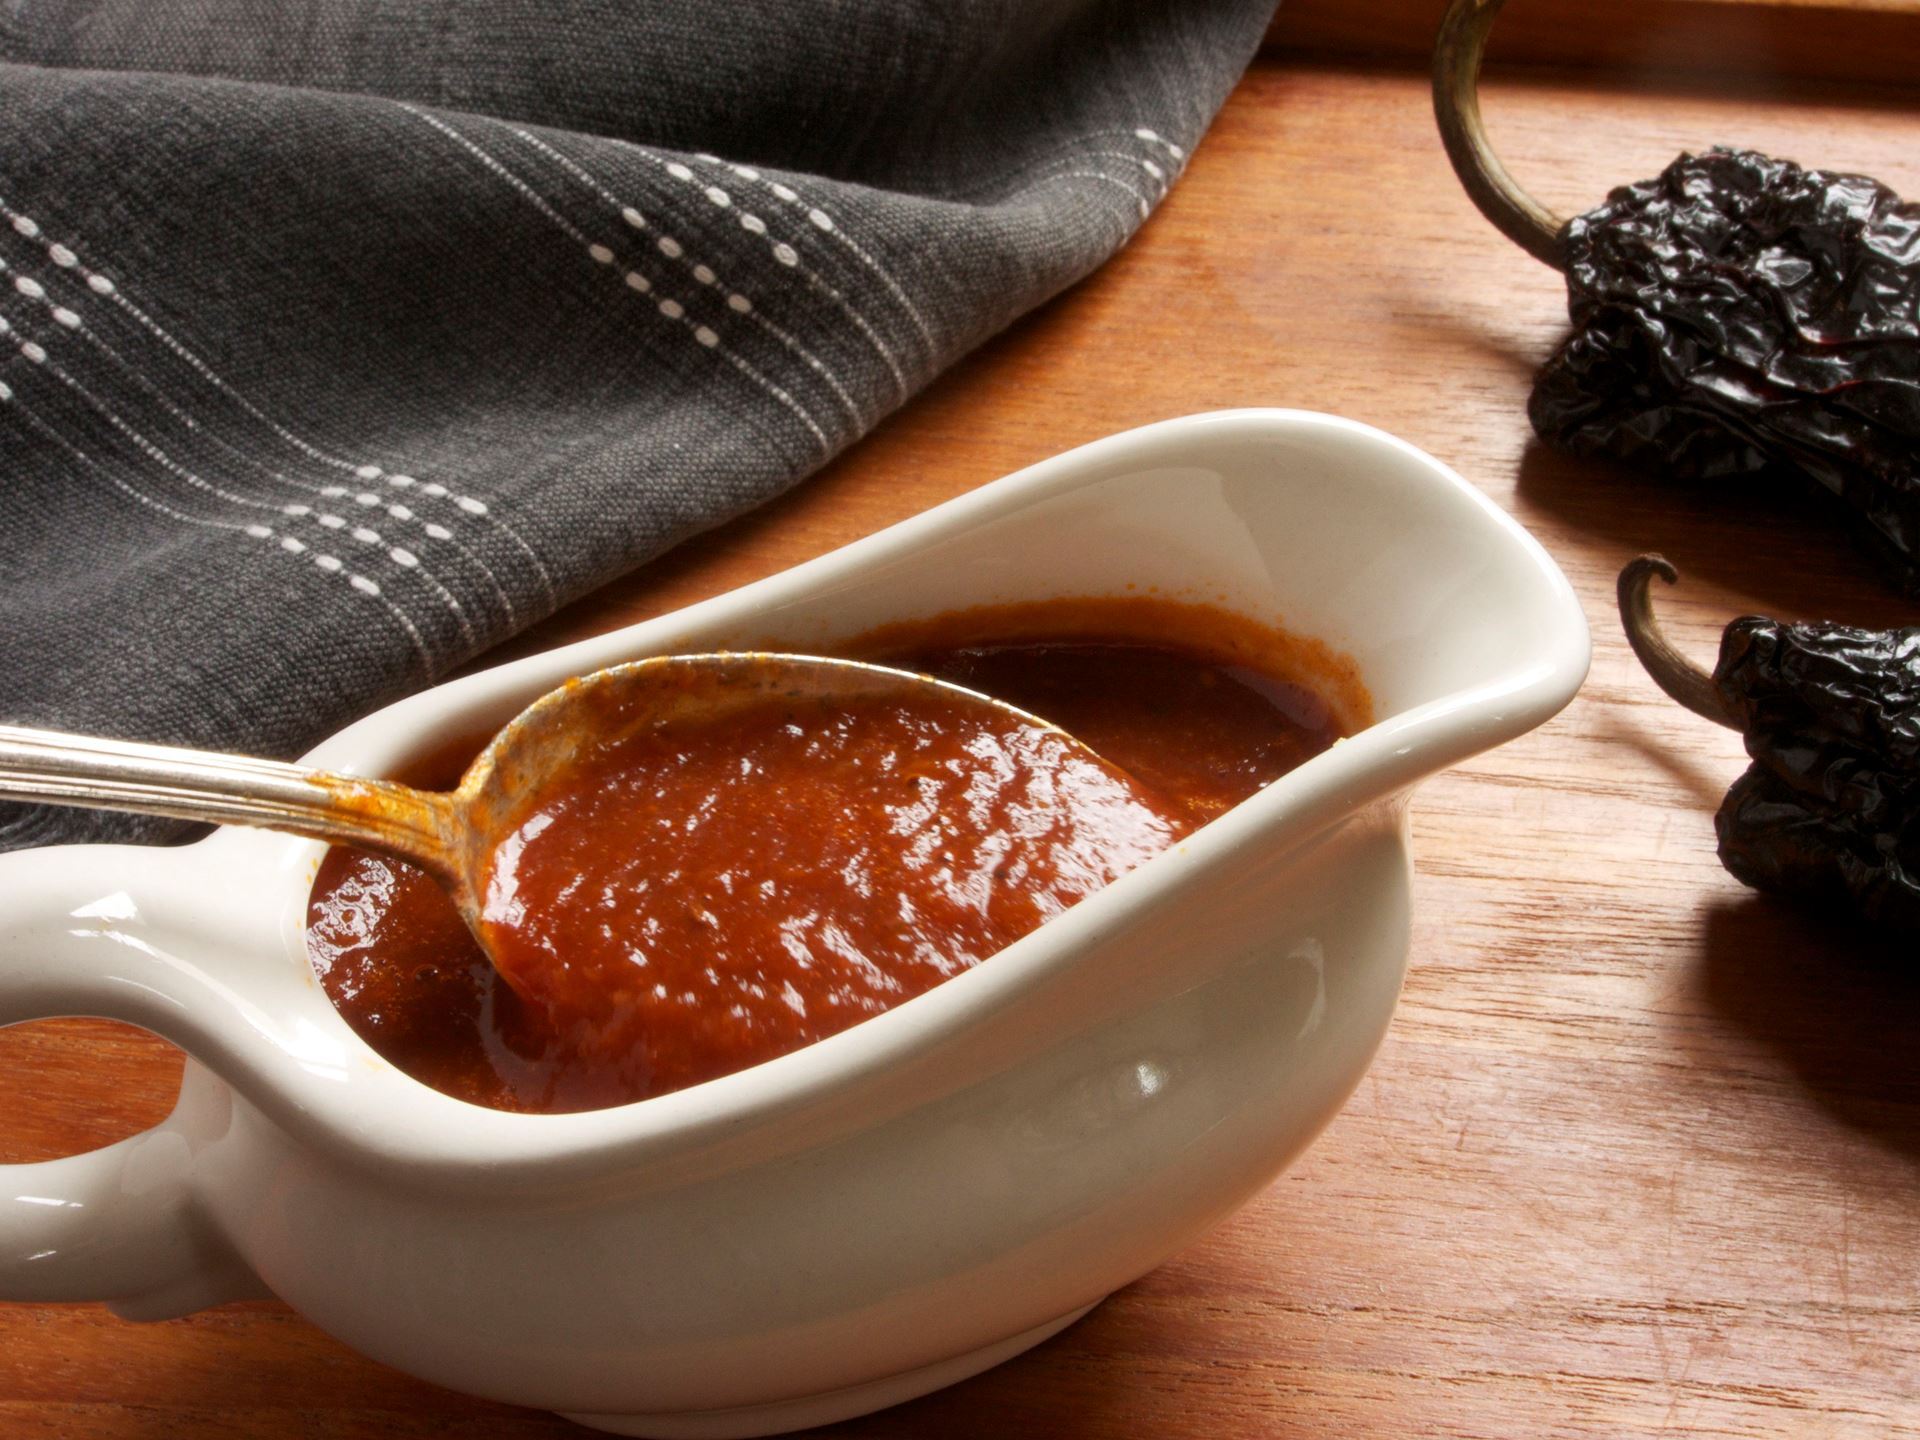 Picture of Broth-Based Enchilada Sauce